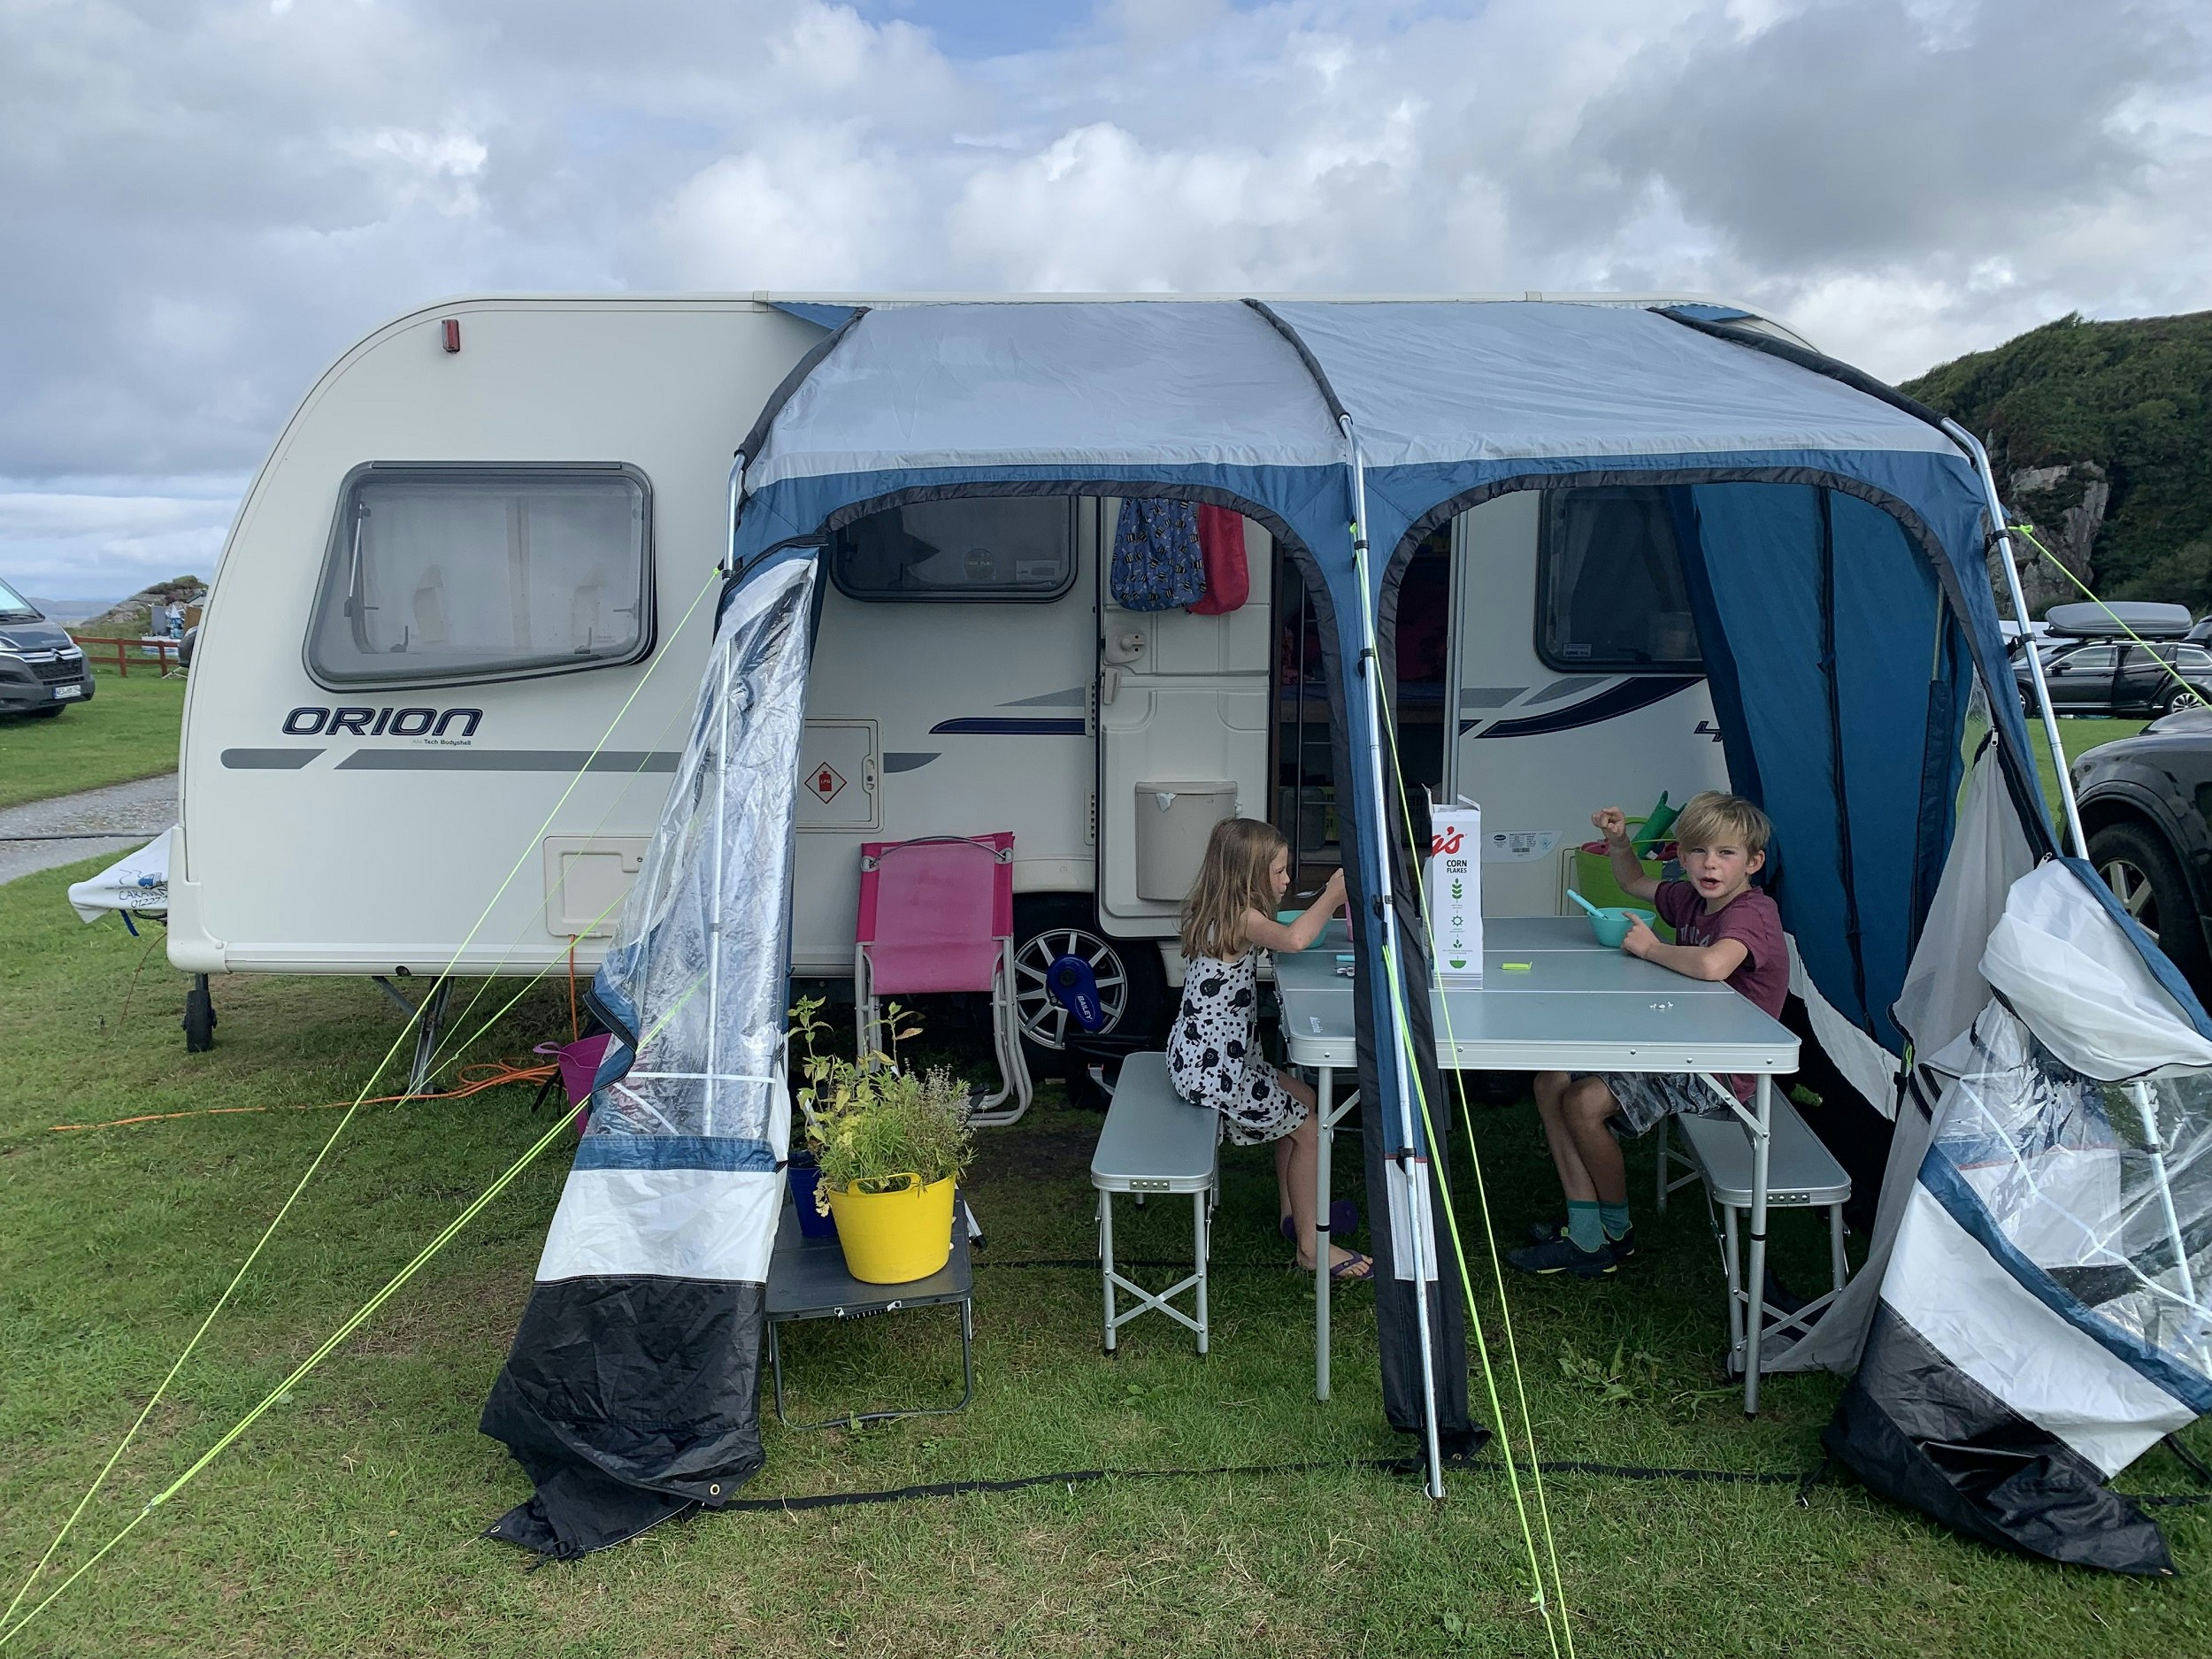 A caravan pitched at a campsite; an awning comes out from the side of the caravan; two children sit at a table under the awning eating breakfast.